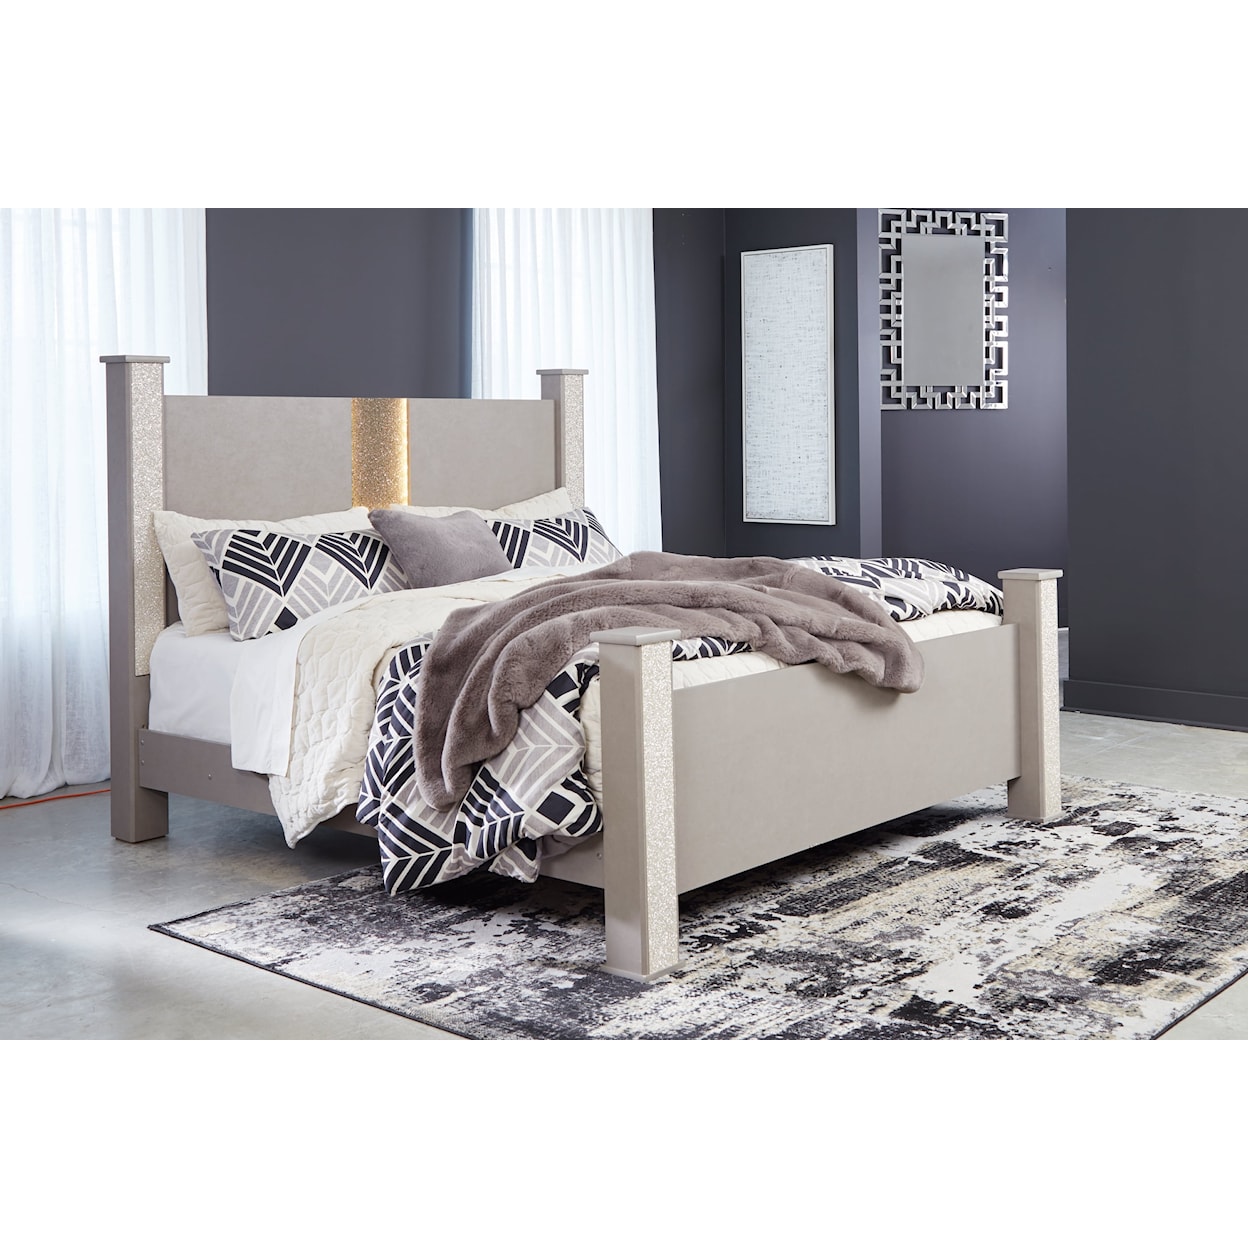 Signature Design by Ashley Surancha Queen Poster Bed